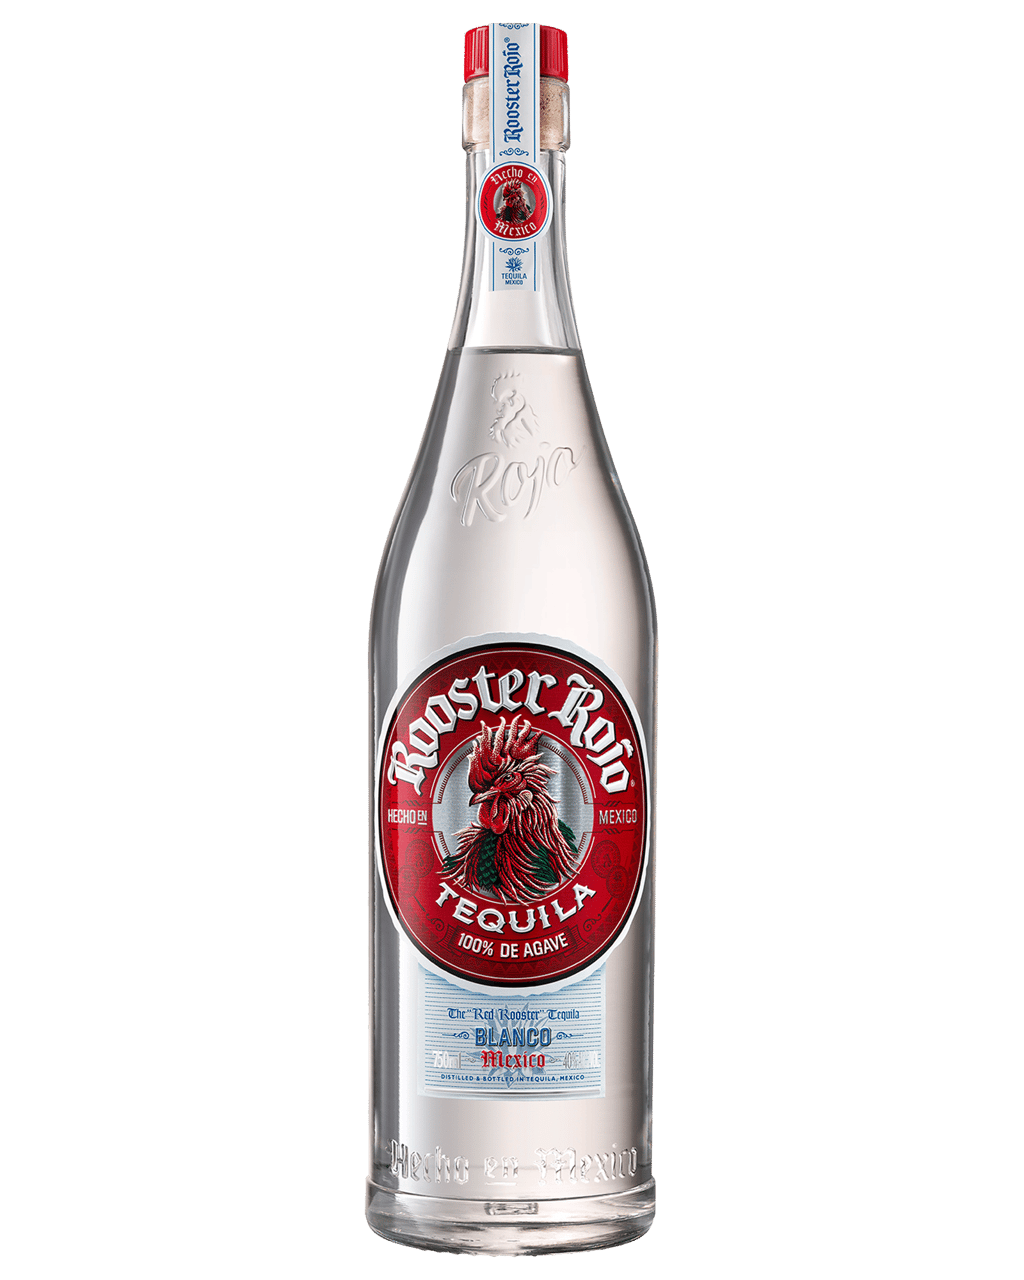 Rooster Rojo Blanco Tequila 700ml Unbeatable Prices Buy Online Best Deals With Delivery 